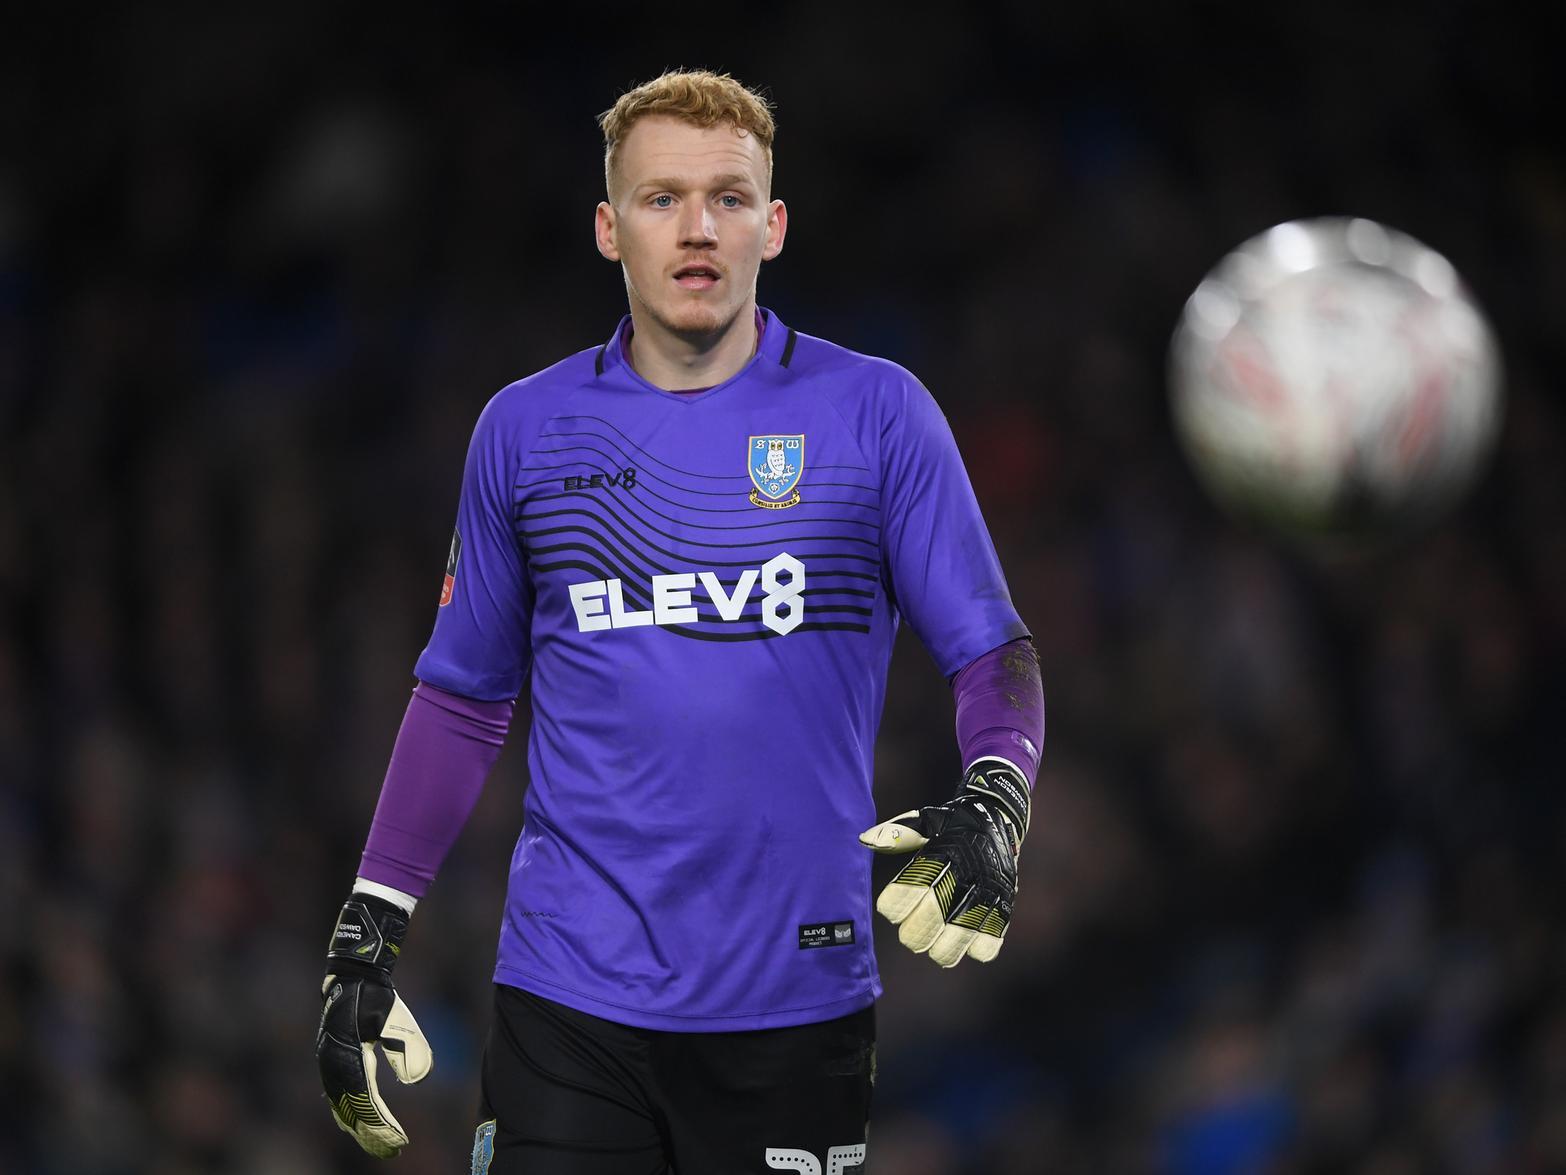 Rangers and Celtic are among a number of clubs looking to sign Sheffield Wednesday goalkeeper Cameron Dawson. His contract is set to expire this summer, meaning he could be available on the cheap. (Sheffield Star)